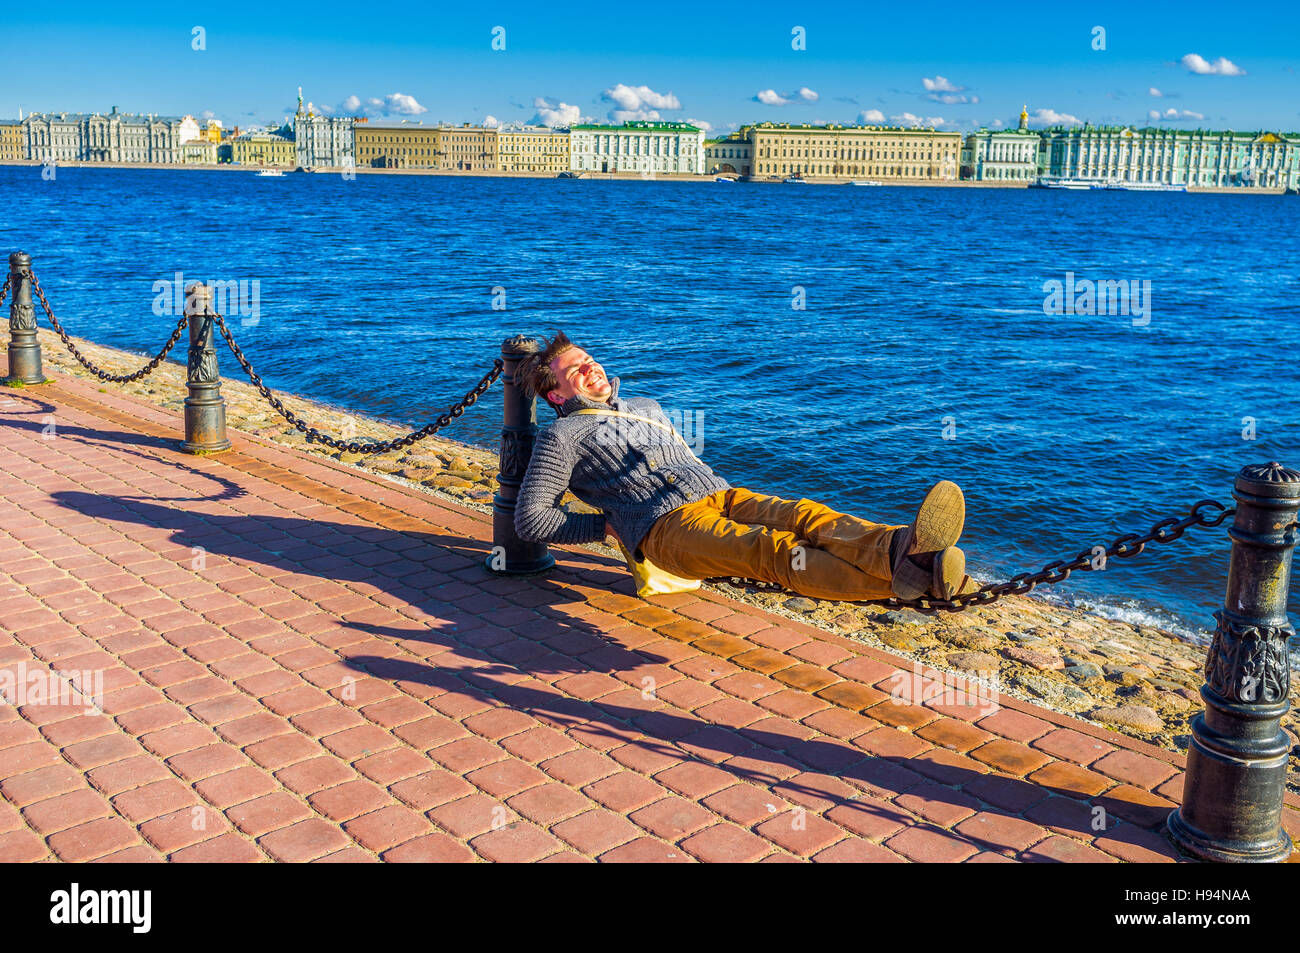 SAINT PETERSBURG - APRIL 24, 2015: Young man in good mood lying on chains on the embankment of Neva River, on April 24 in Saint Petersburg. Stock Photo